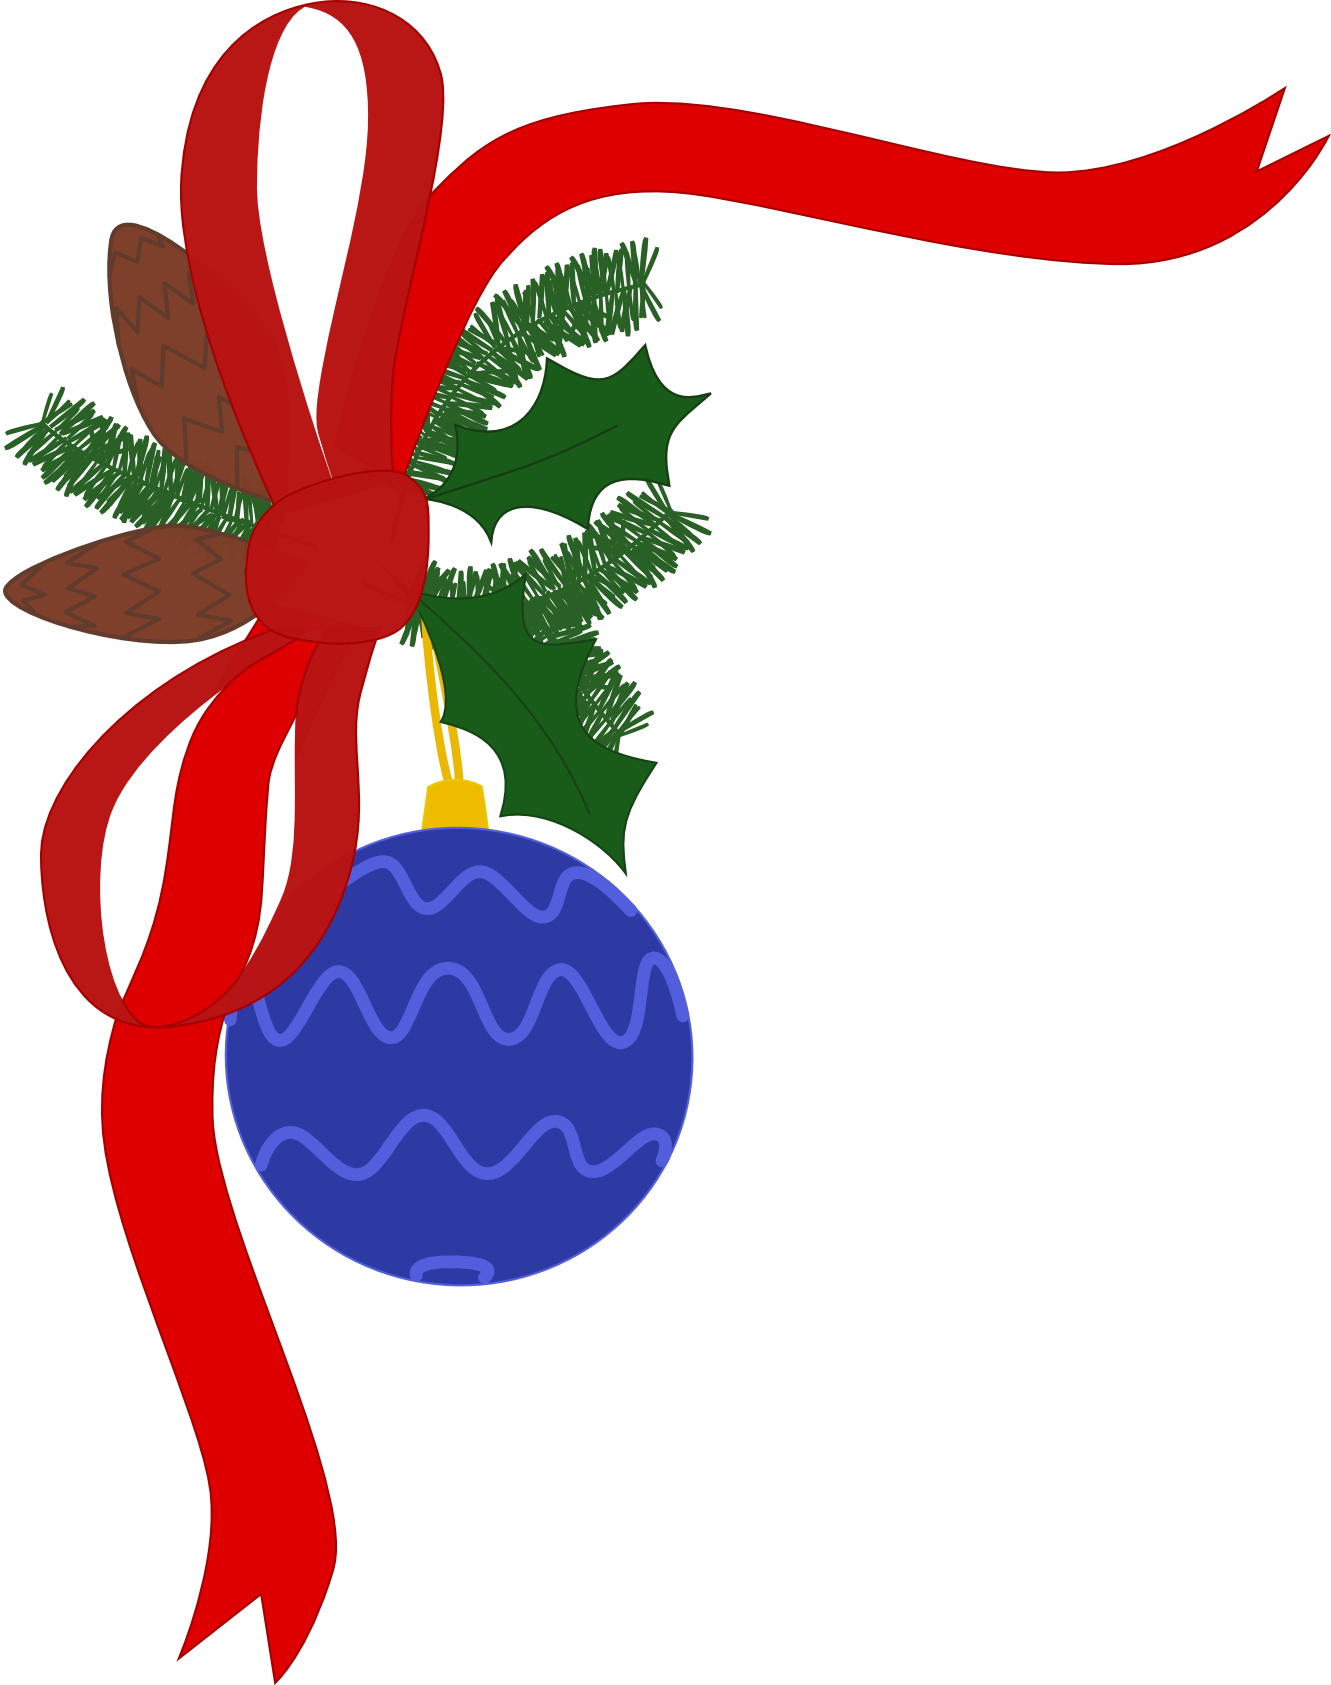 Christmas Decorations Clip Art - Clipart library